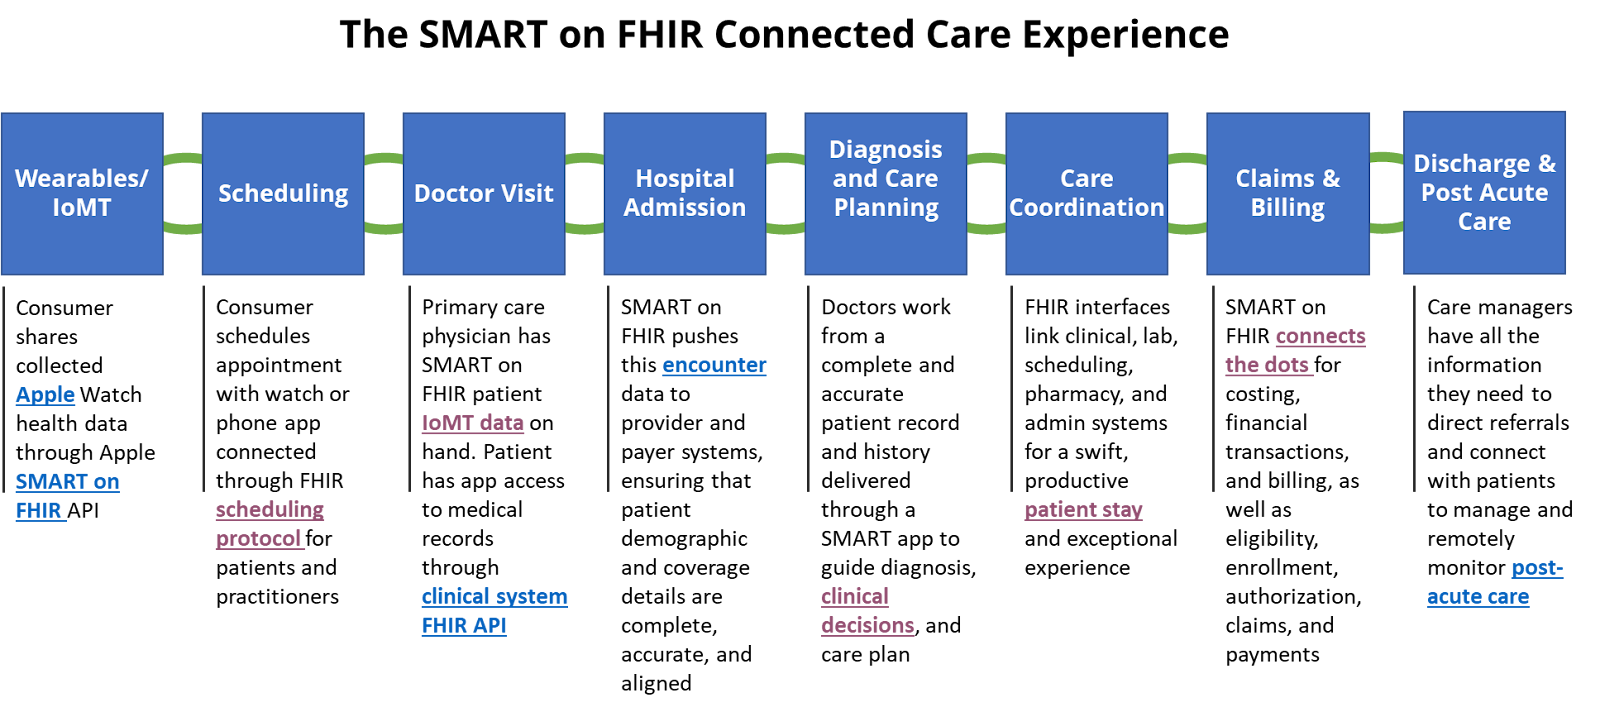 SMART on FHIR Connected Care Experience graphic 